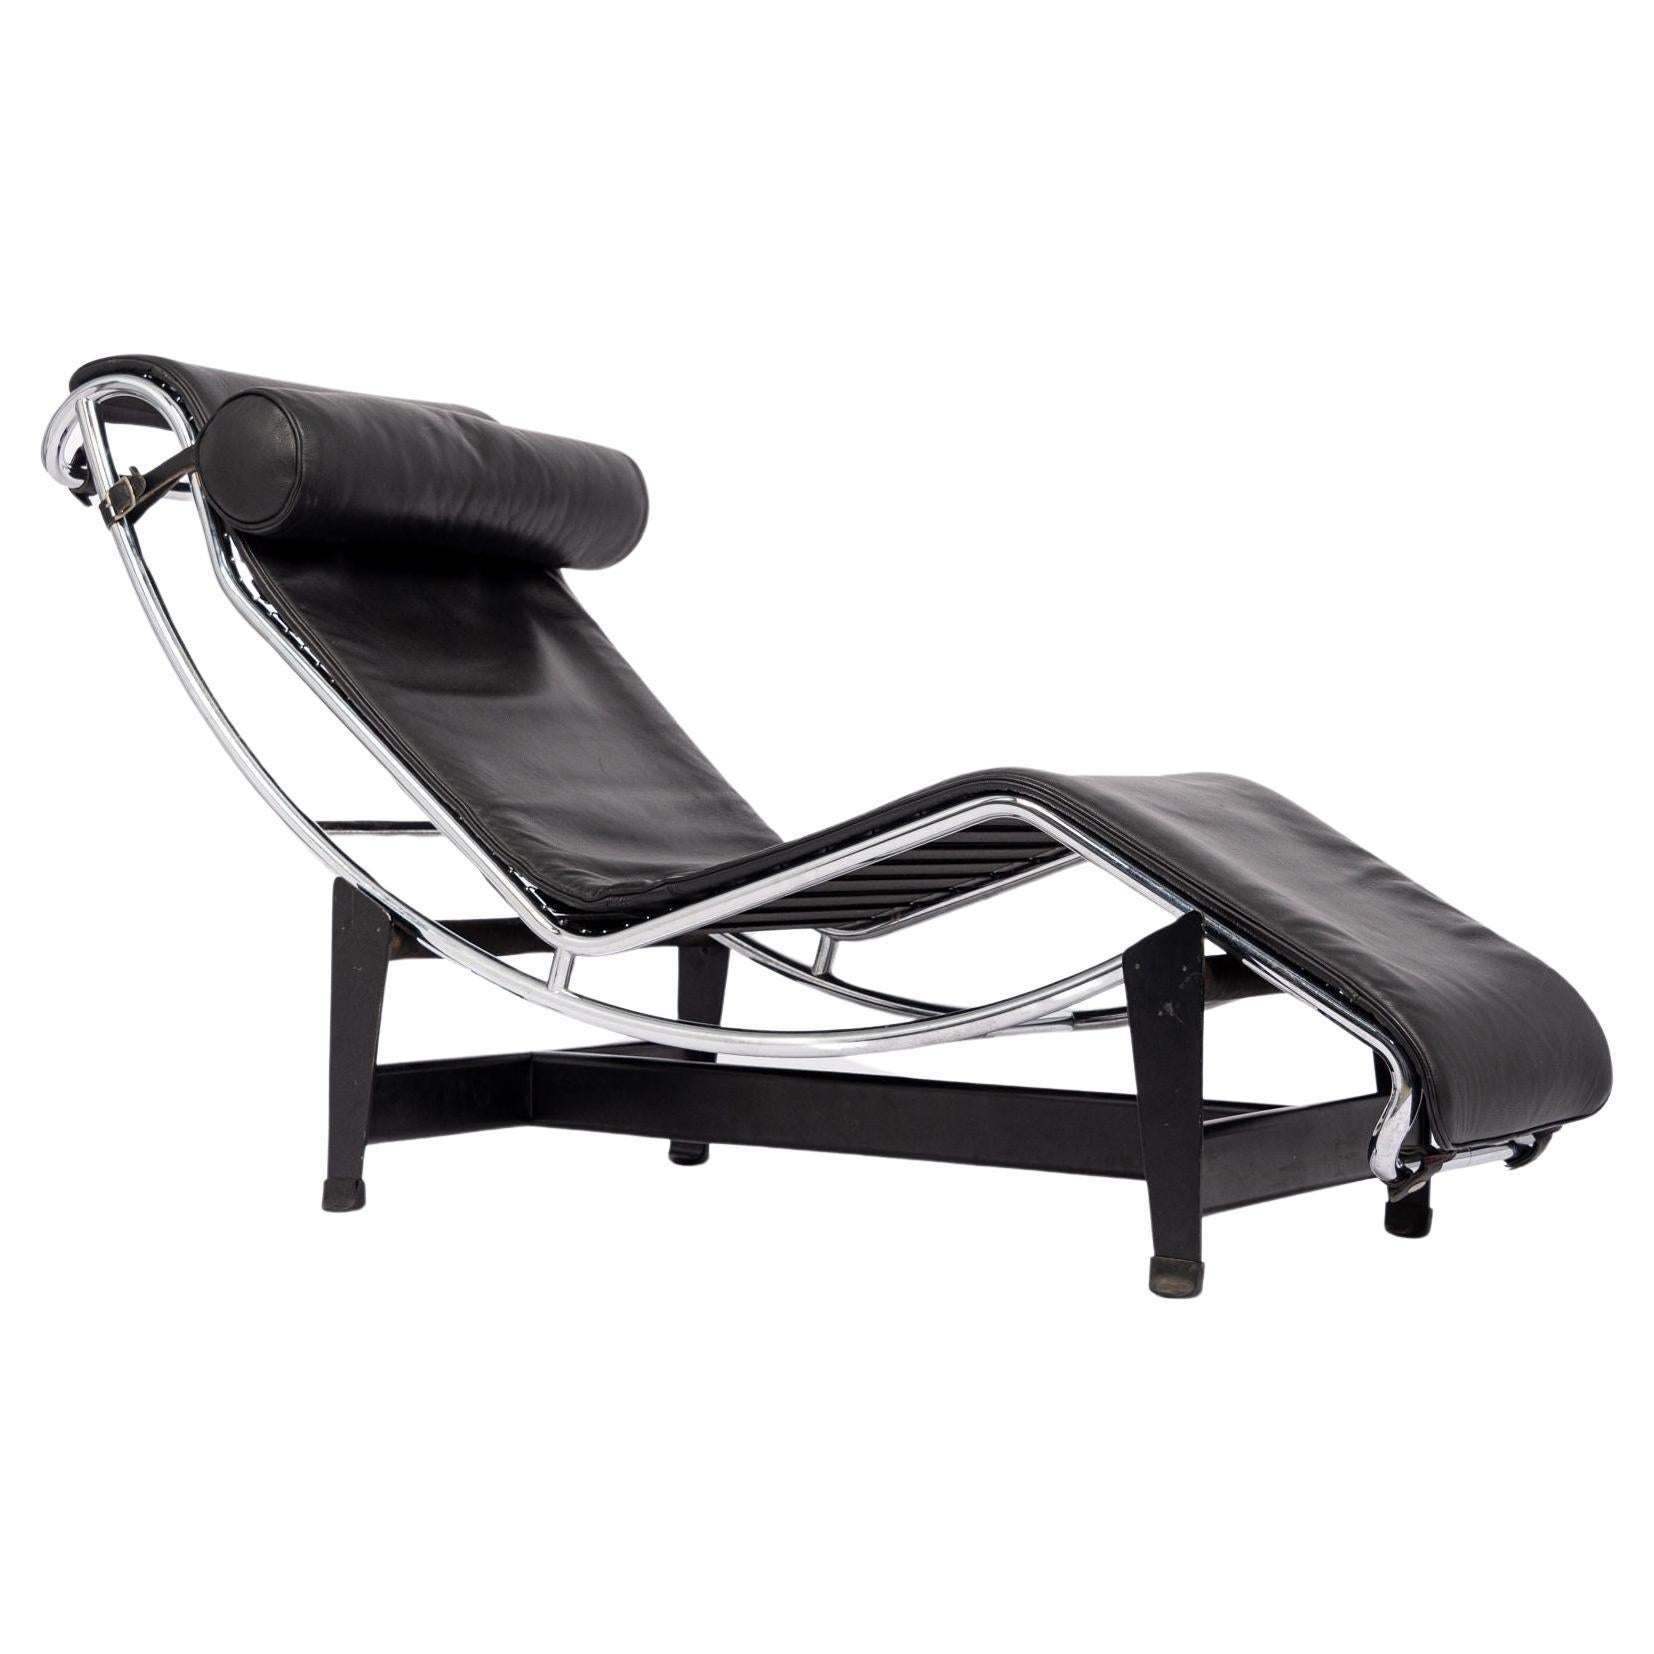 Who designed the LC4 chaise?